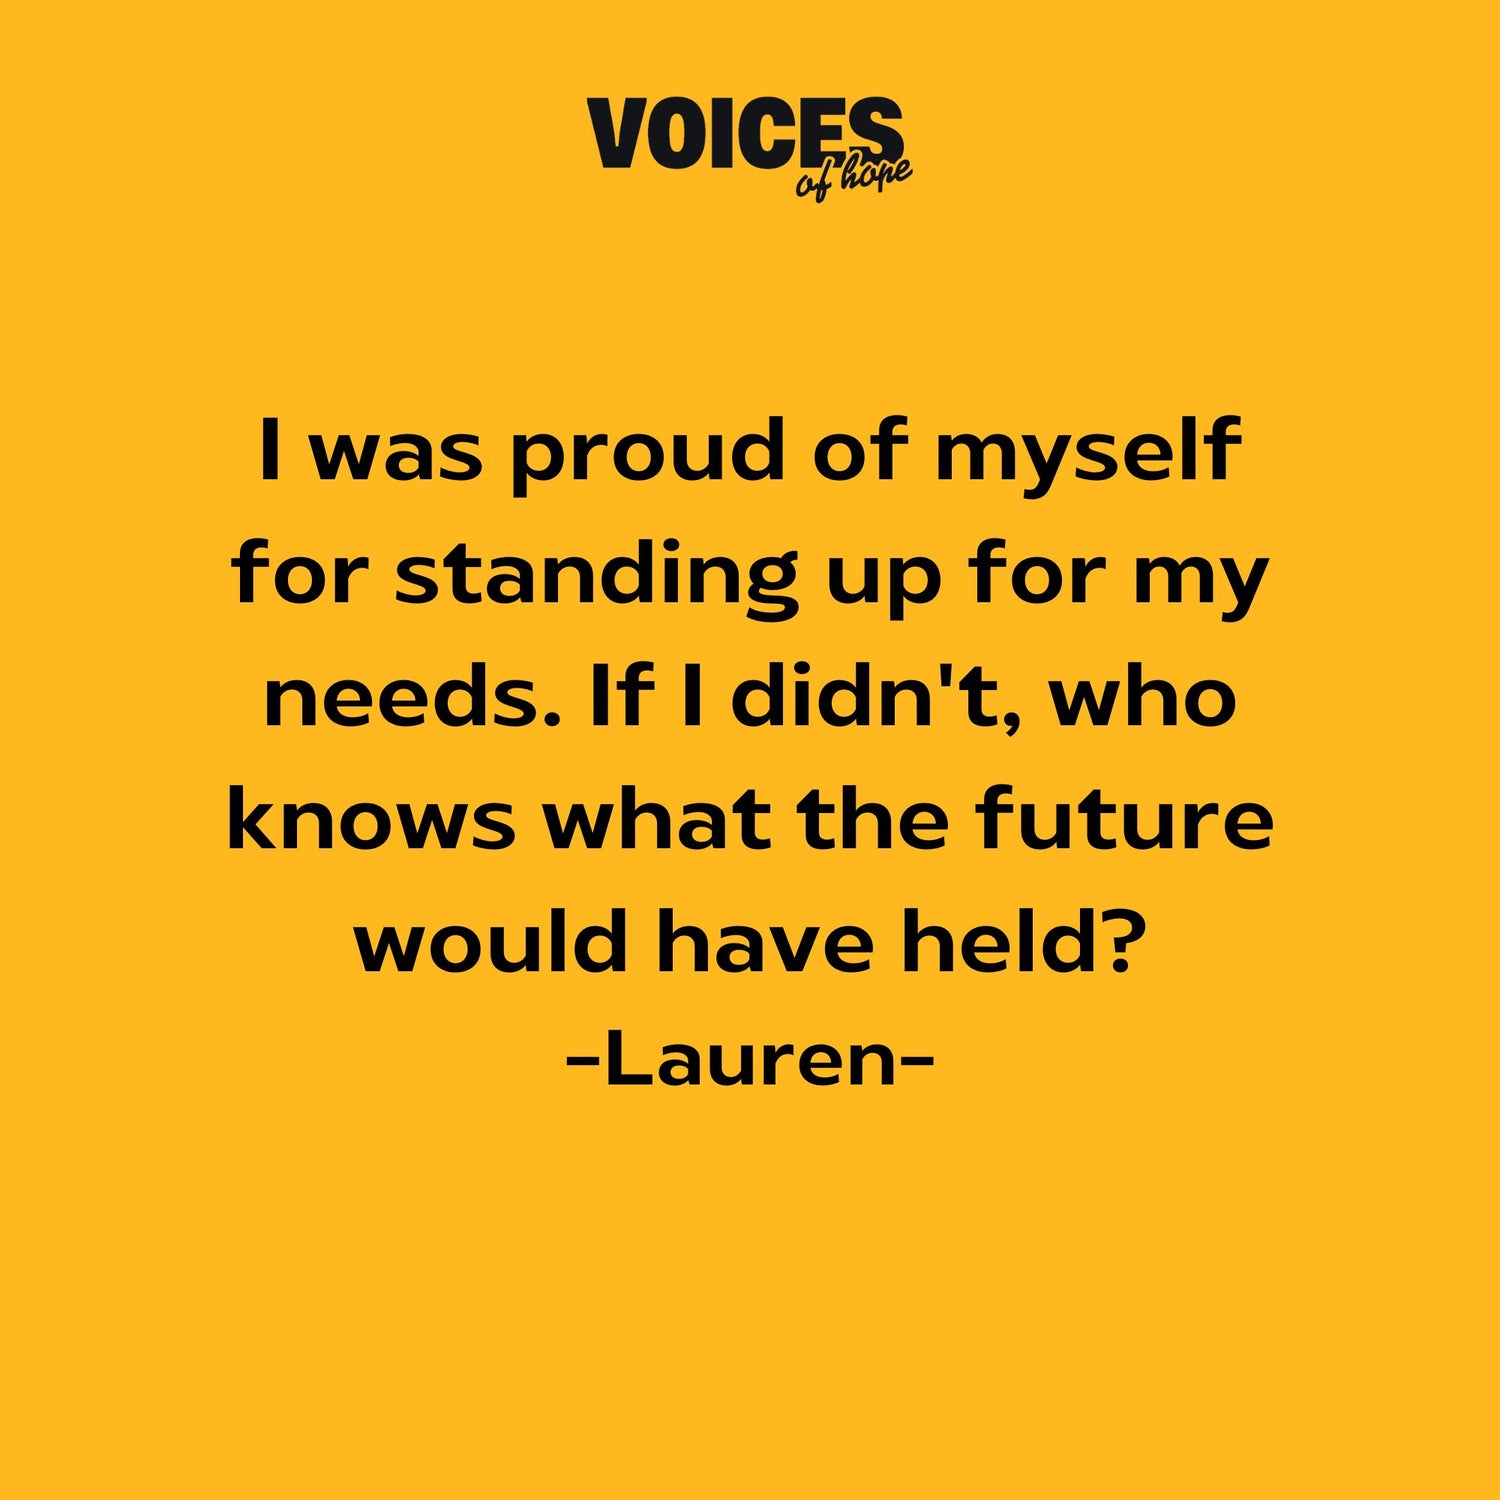 Yellow background with black writing that reads: "I was proud of myself for standing up for my needs. If I didn't, who knows what the future would have held? Lauren."